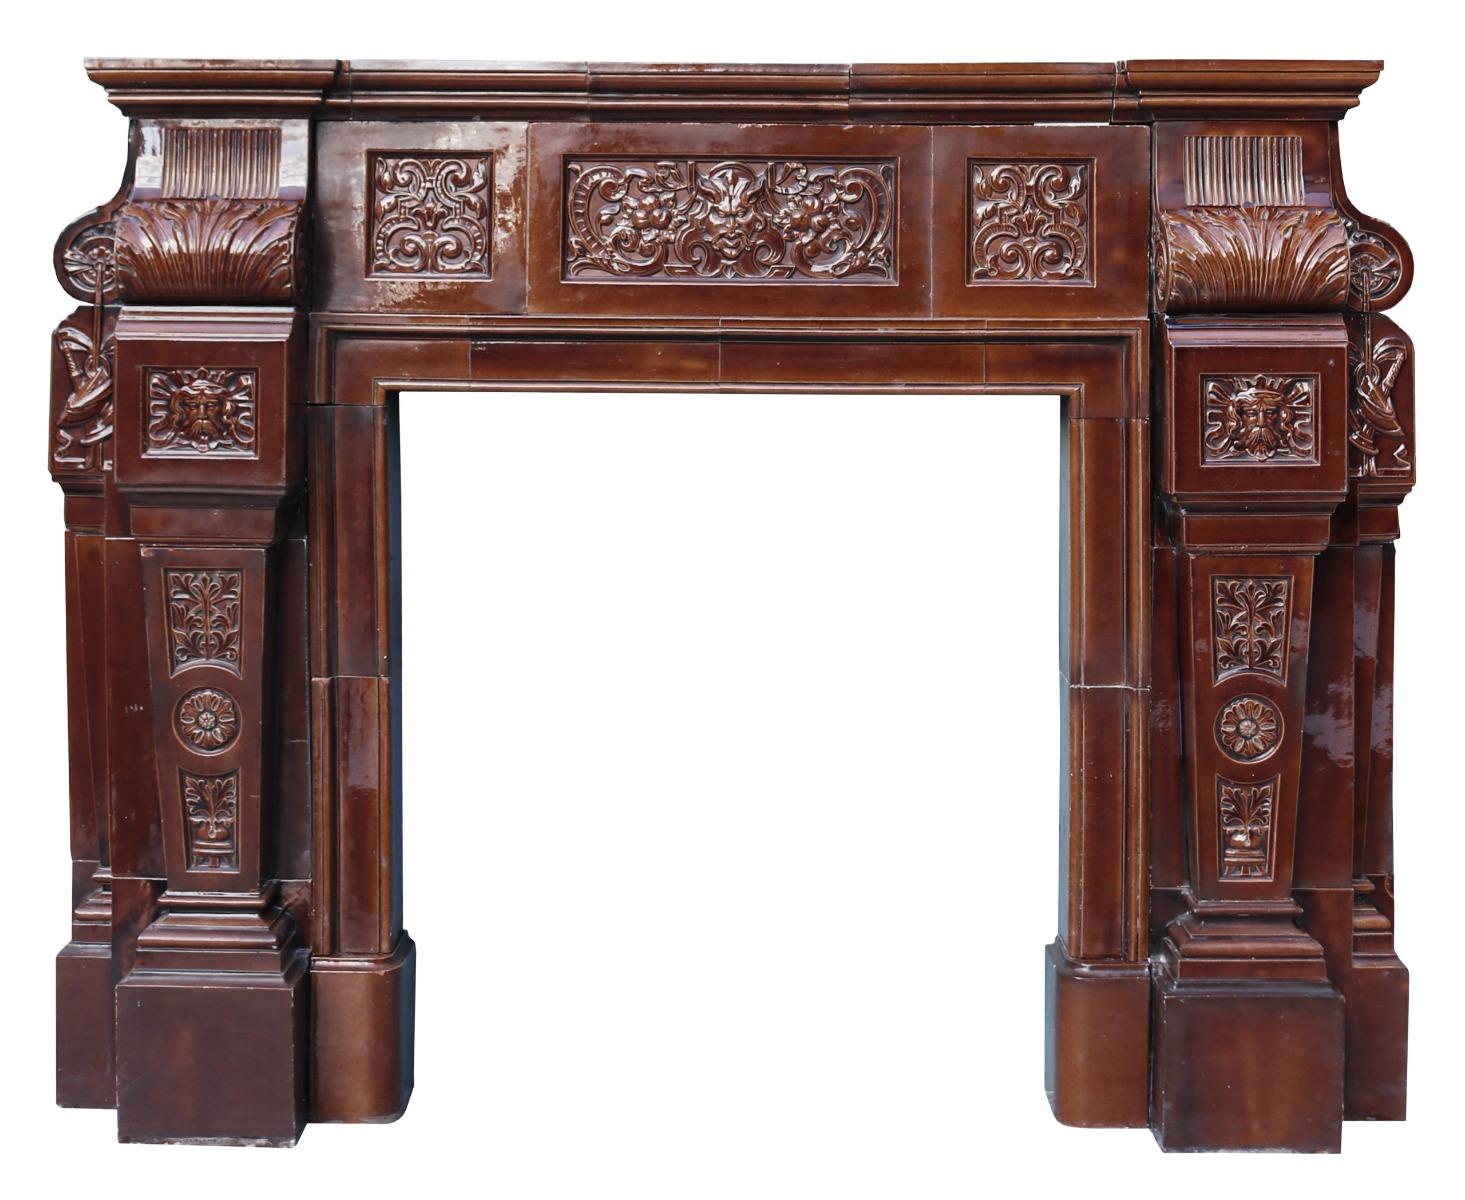 A very rare large scale brown glazed ceramic fire surround by Royal Doulton.

Additional dimensions:

Opening height 96.5 cm

Opening width 90 cm

Width between outsides of the foot blocks 182 cm.